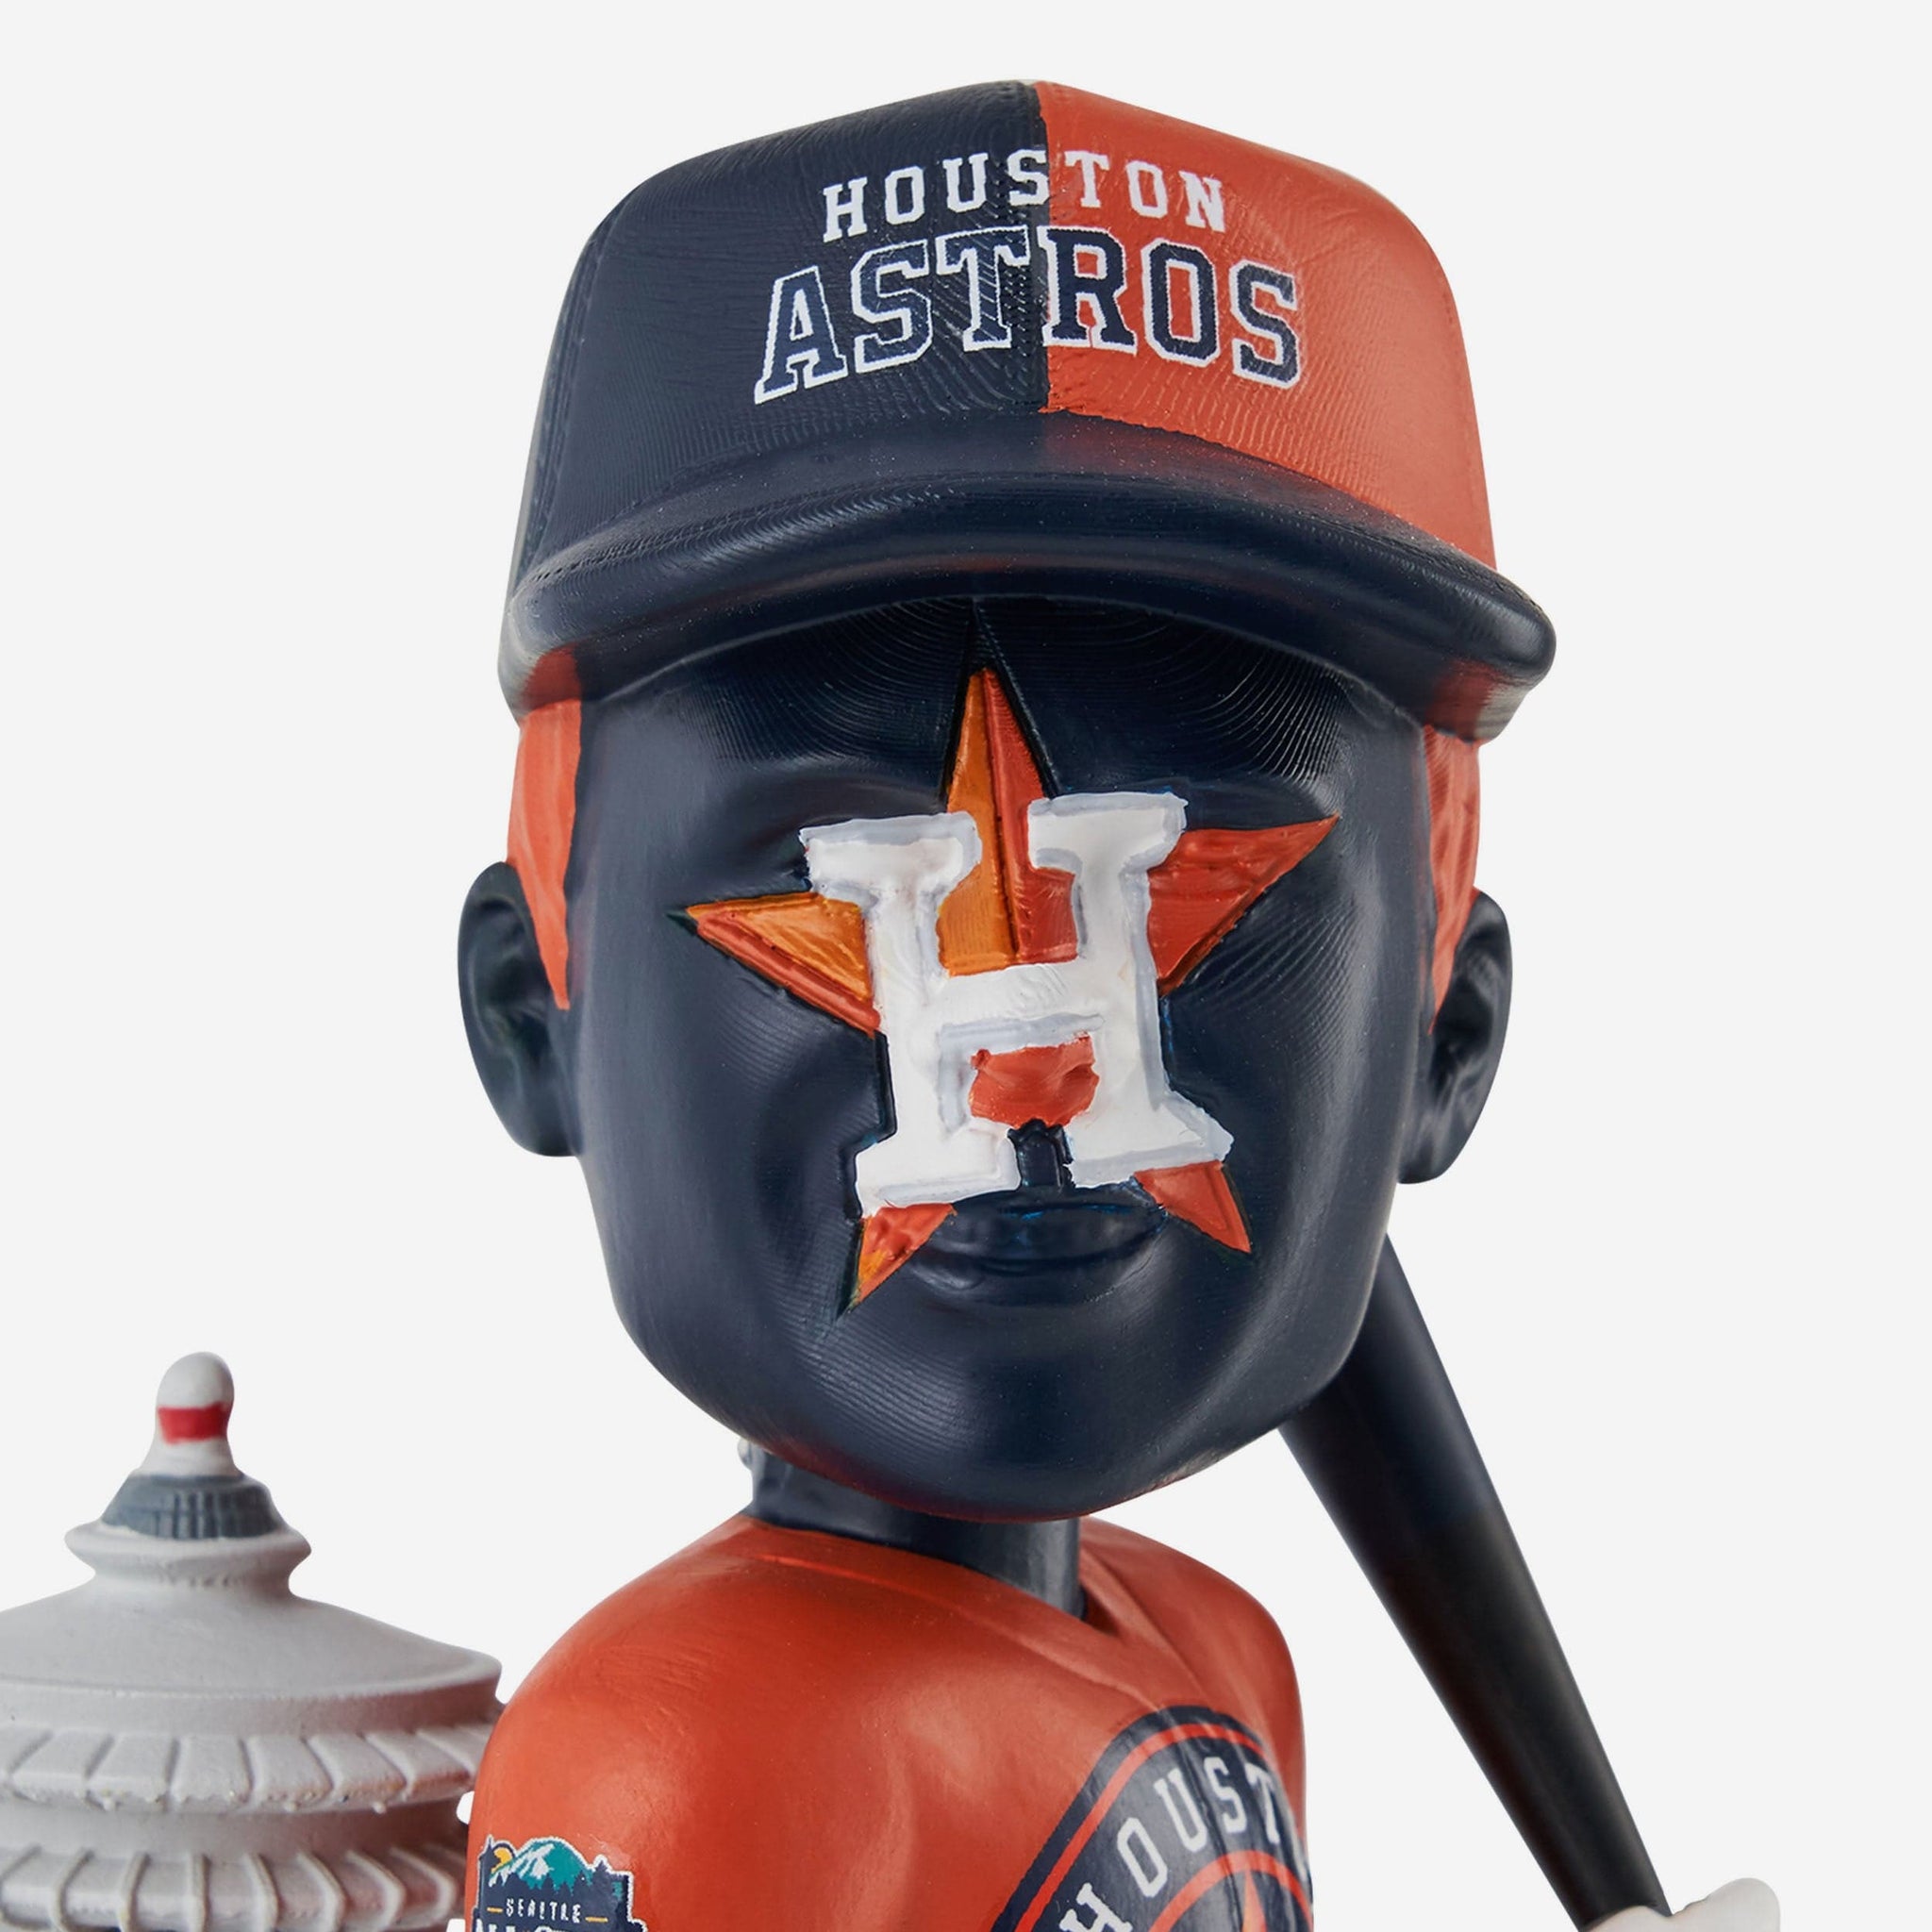 Houston Astros 2023 All-Star Bobbles on Parade Bobblehead Officially Licensed by MLB